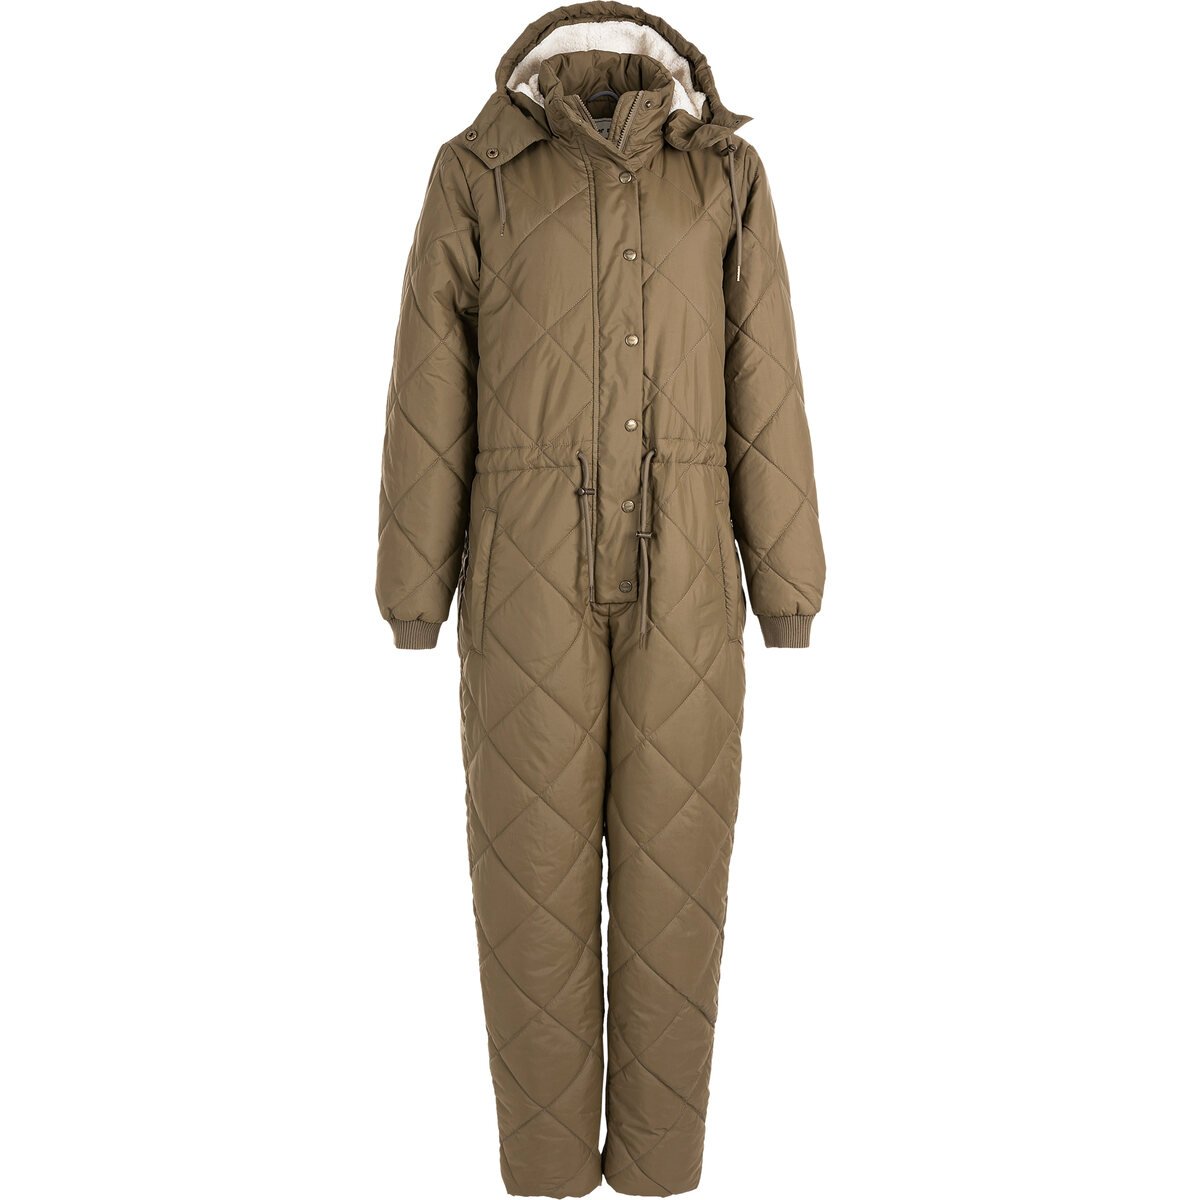 Weather Report Mina Quilted Jumpsuit Dame, dark olive thumbnail